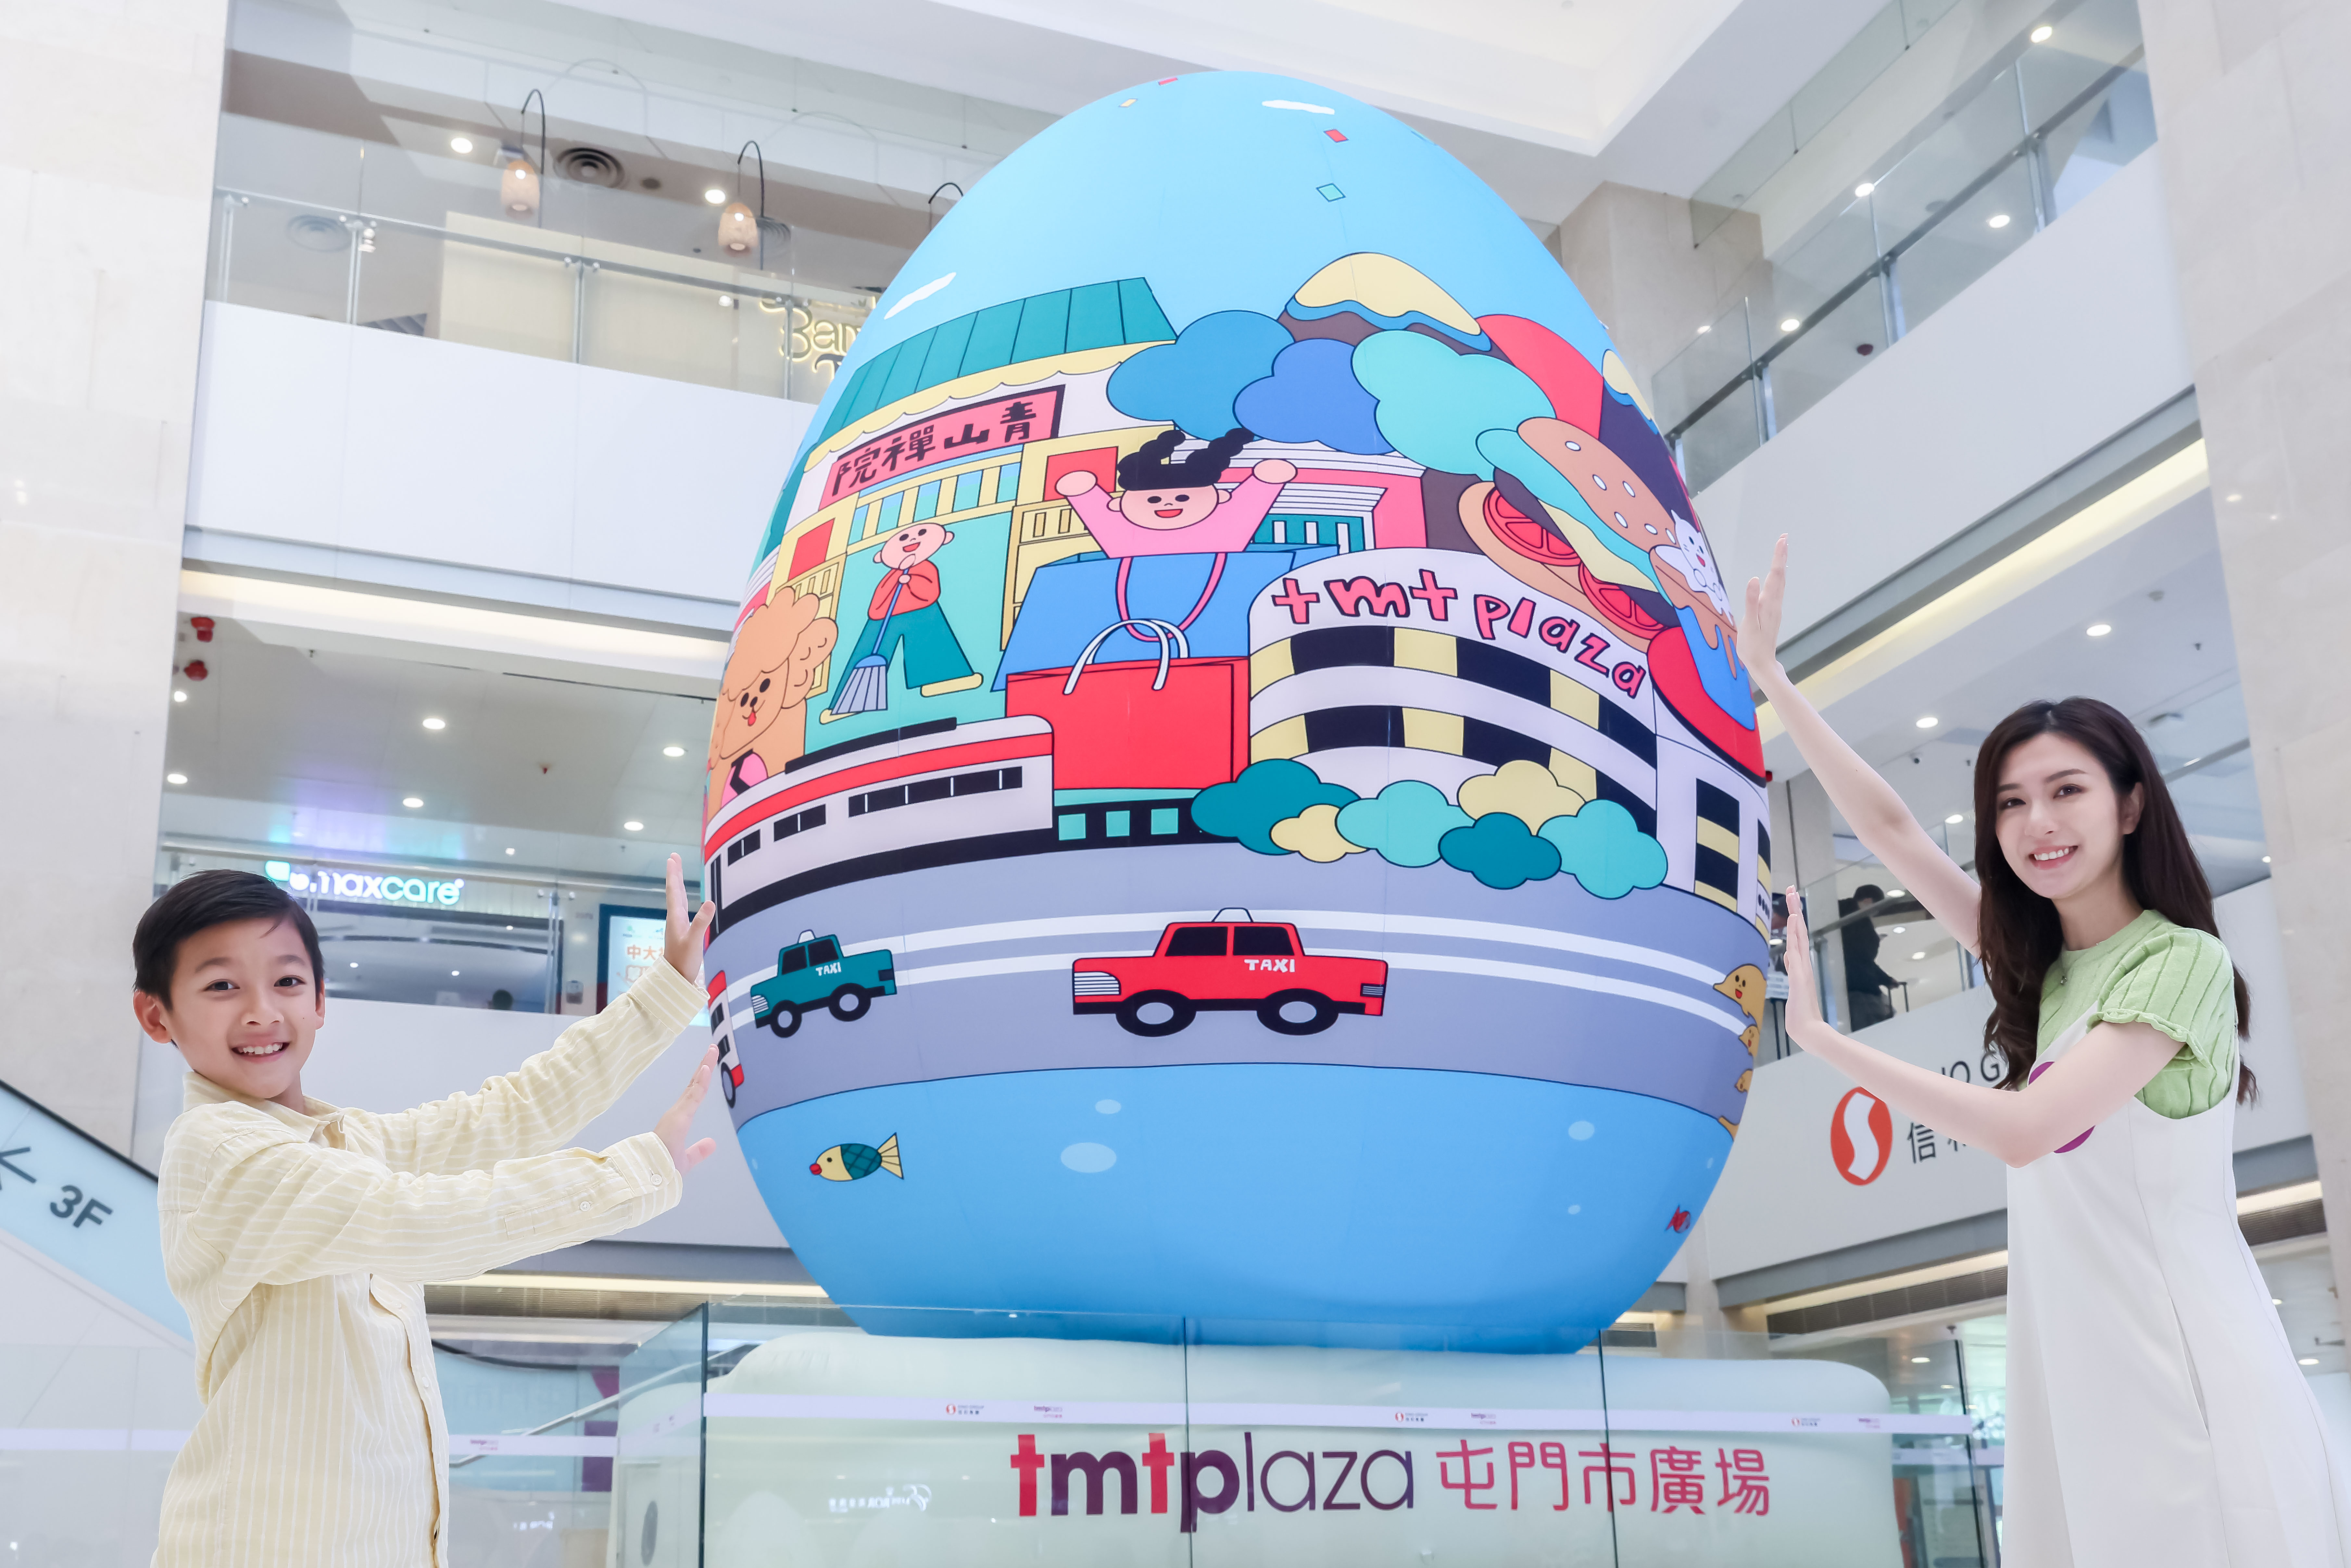 tmtplaza collaborated with illustrator Isabel Tong to combine elements of Tuen Mun with a whimsical and humorous style, creating a 7-meter tall inflatable Easter egg to spread joy during the festival.